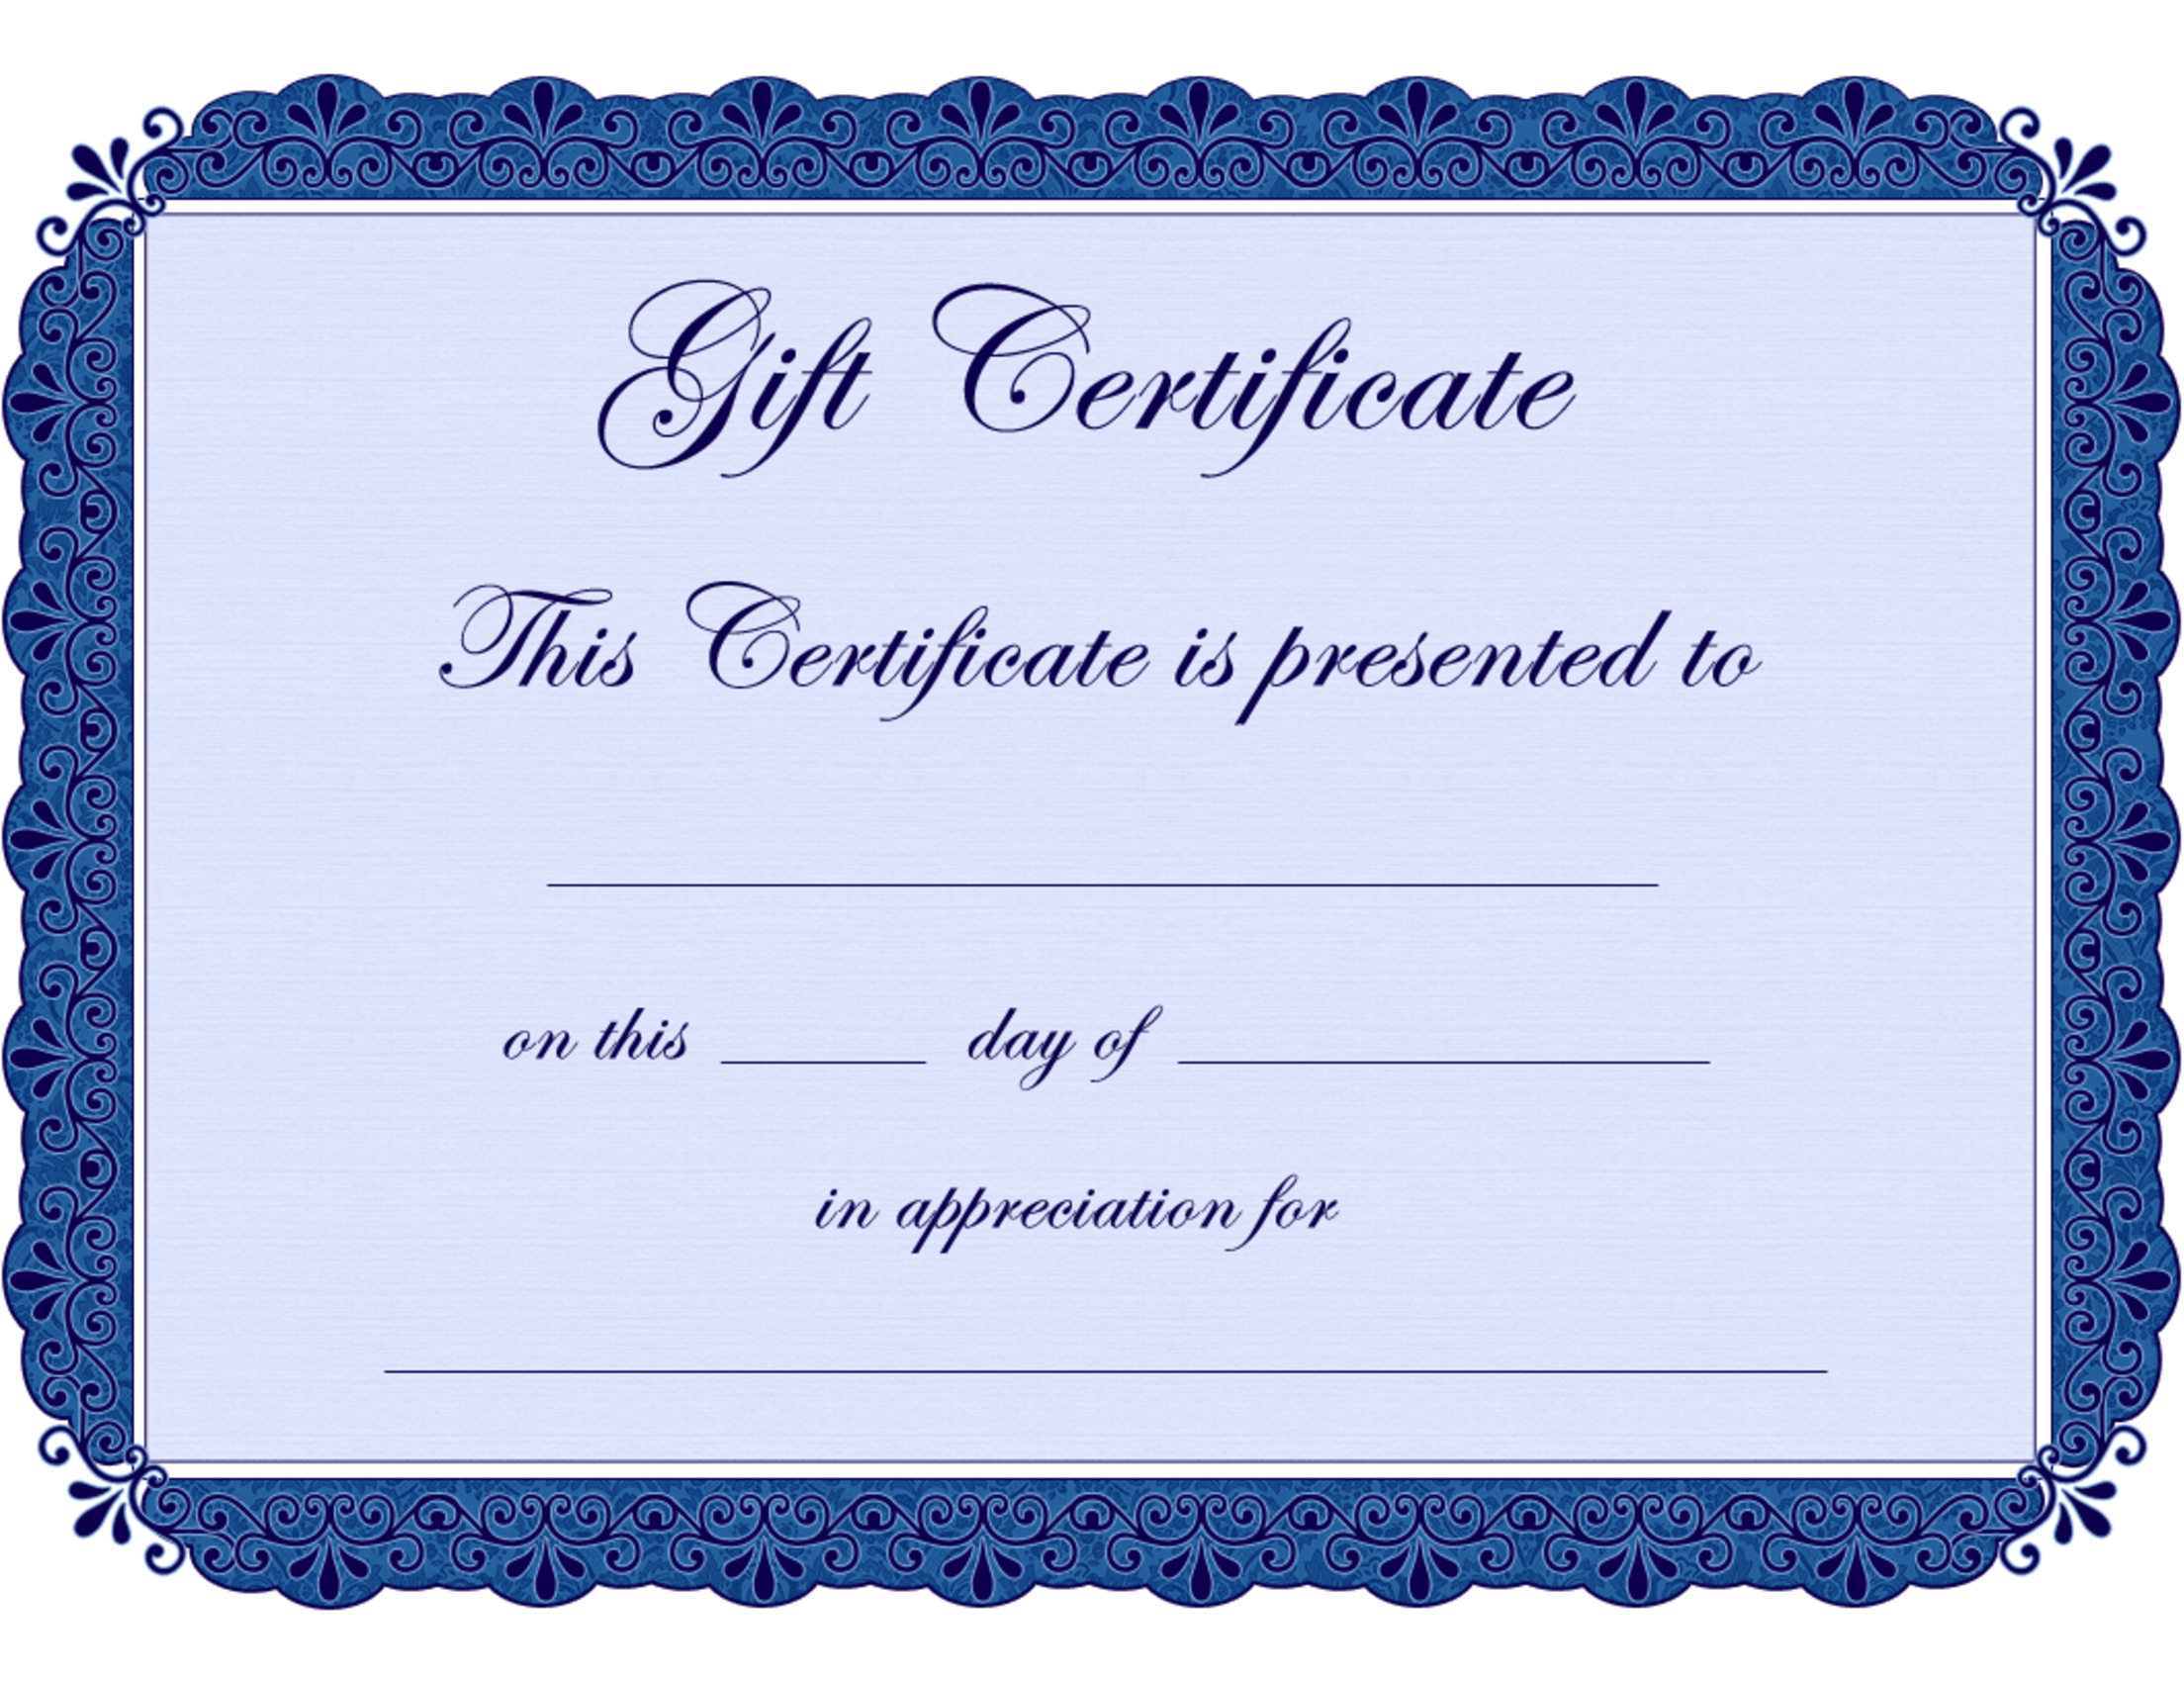 Gift Certificate Gift Certificate Value When Purchasing A Gift